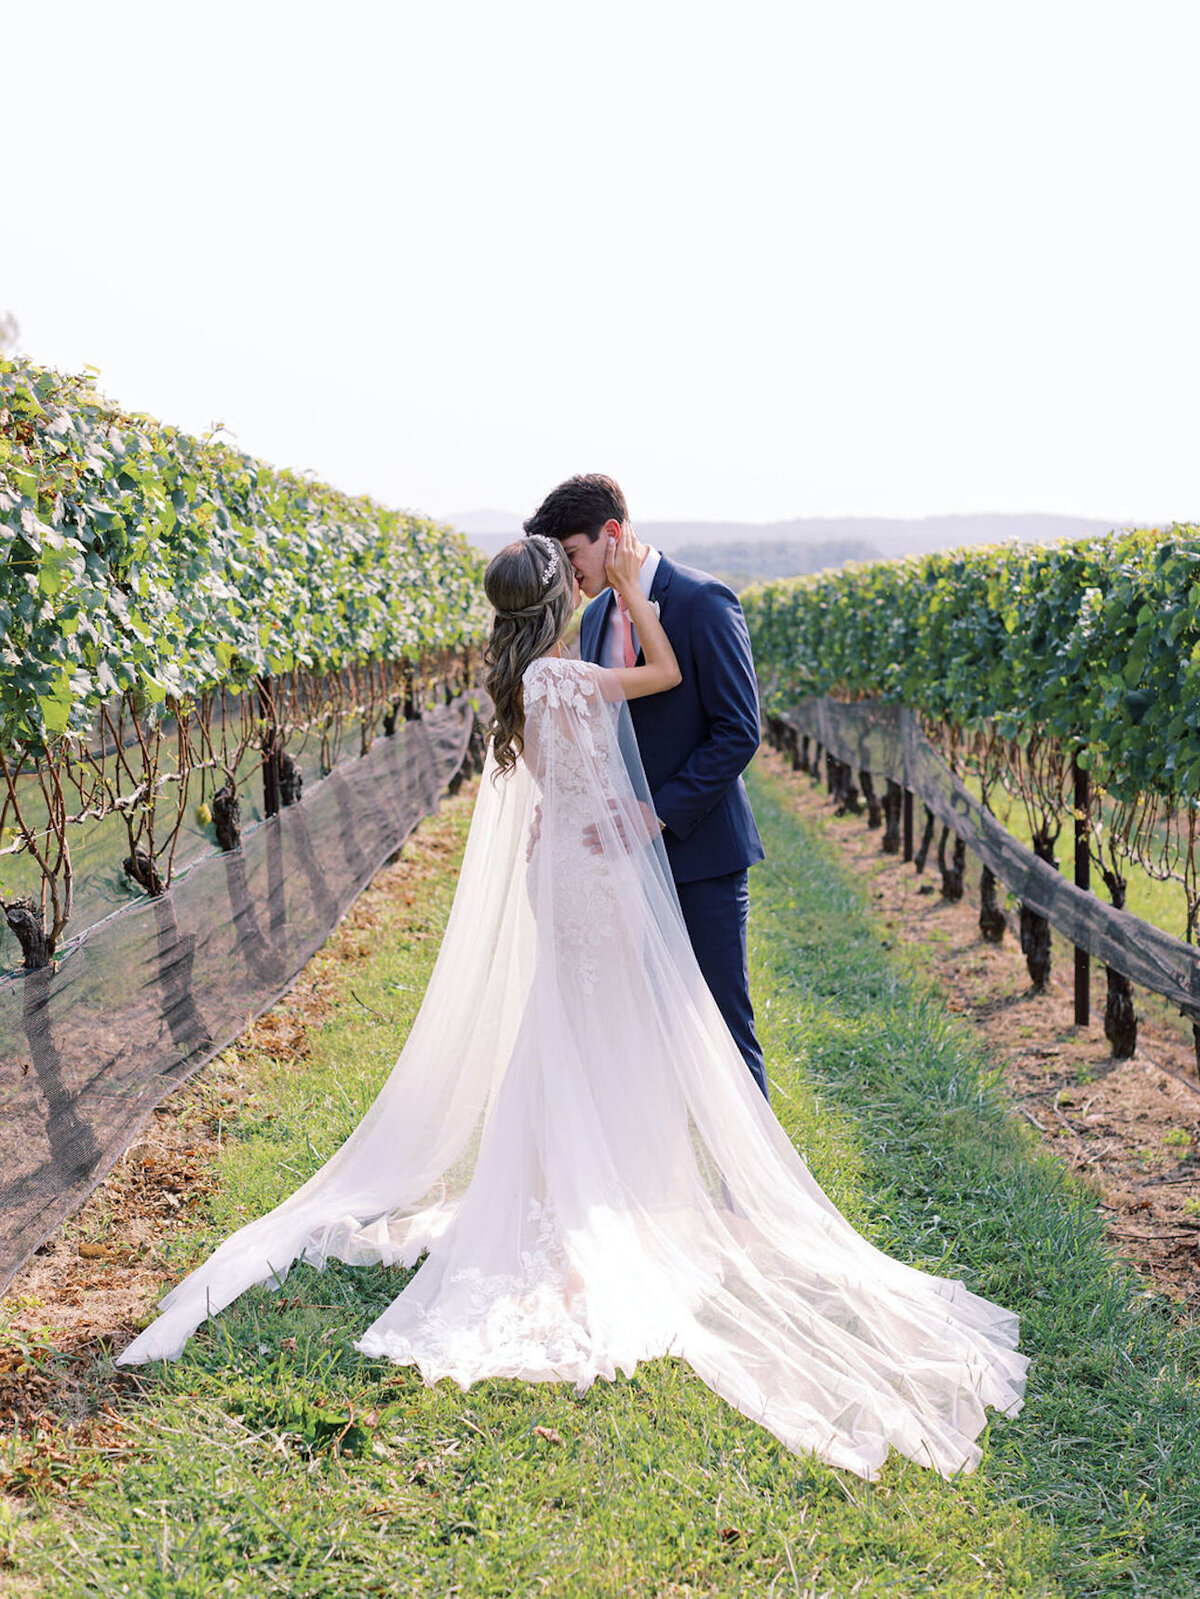 Megan-Brandon-Stone-Tower-Winery-Wedding-The-finer-points-event-planning-Kir2ben-photography00022